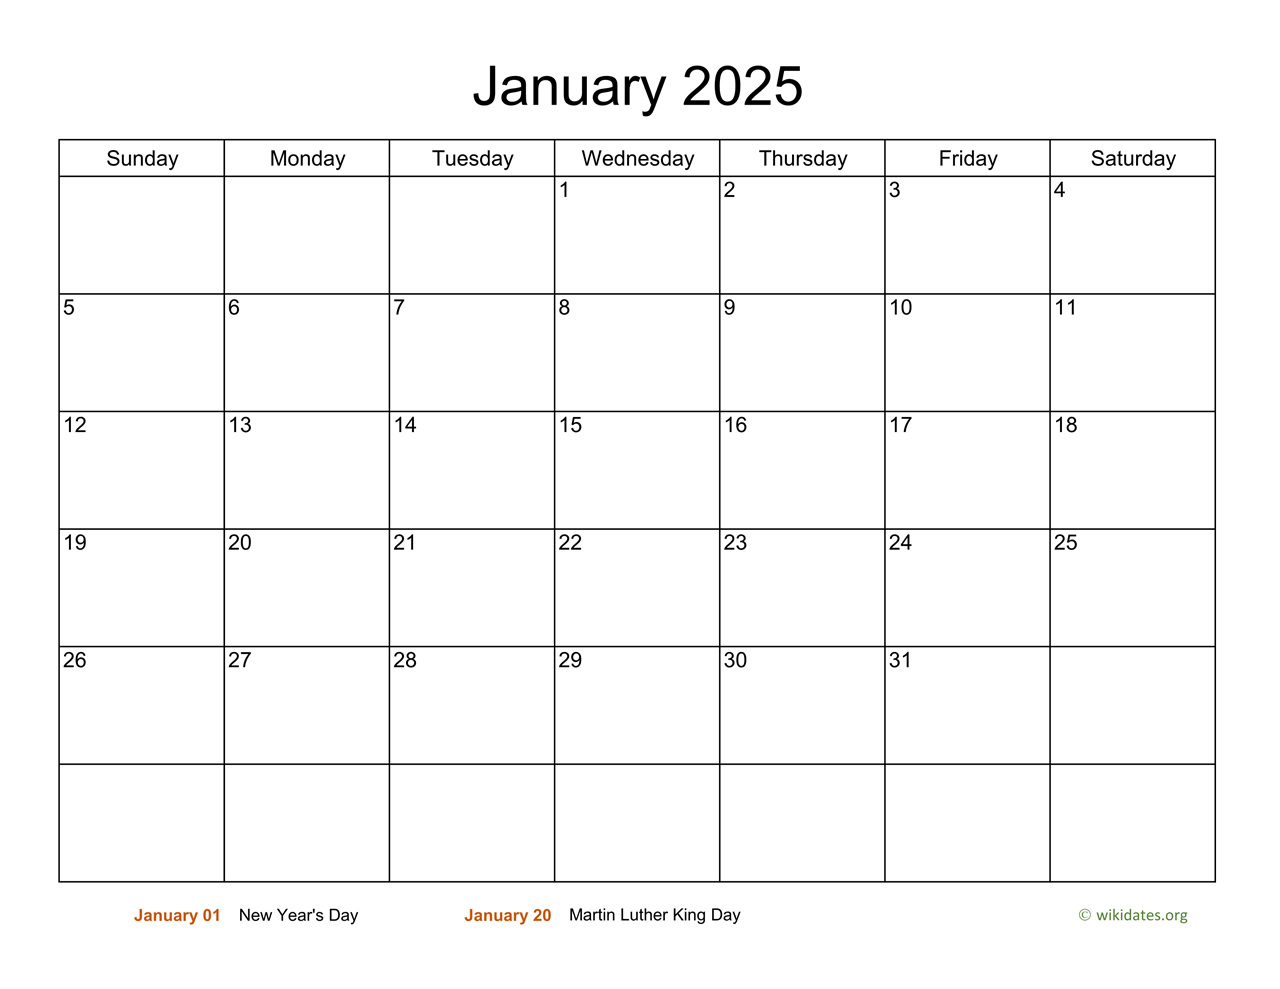 monthly-basic-calendar-for-2025-wikidates